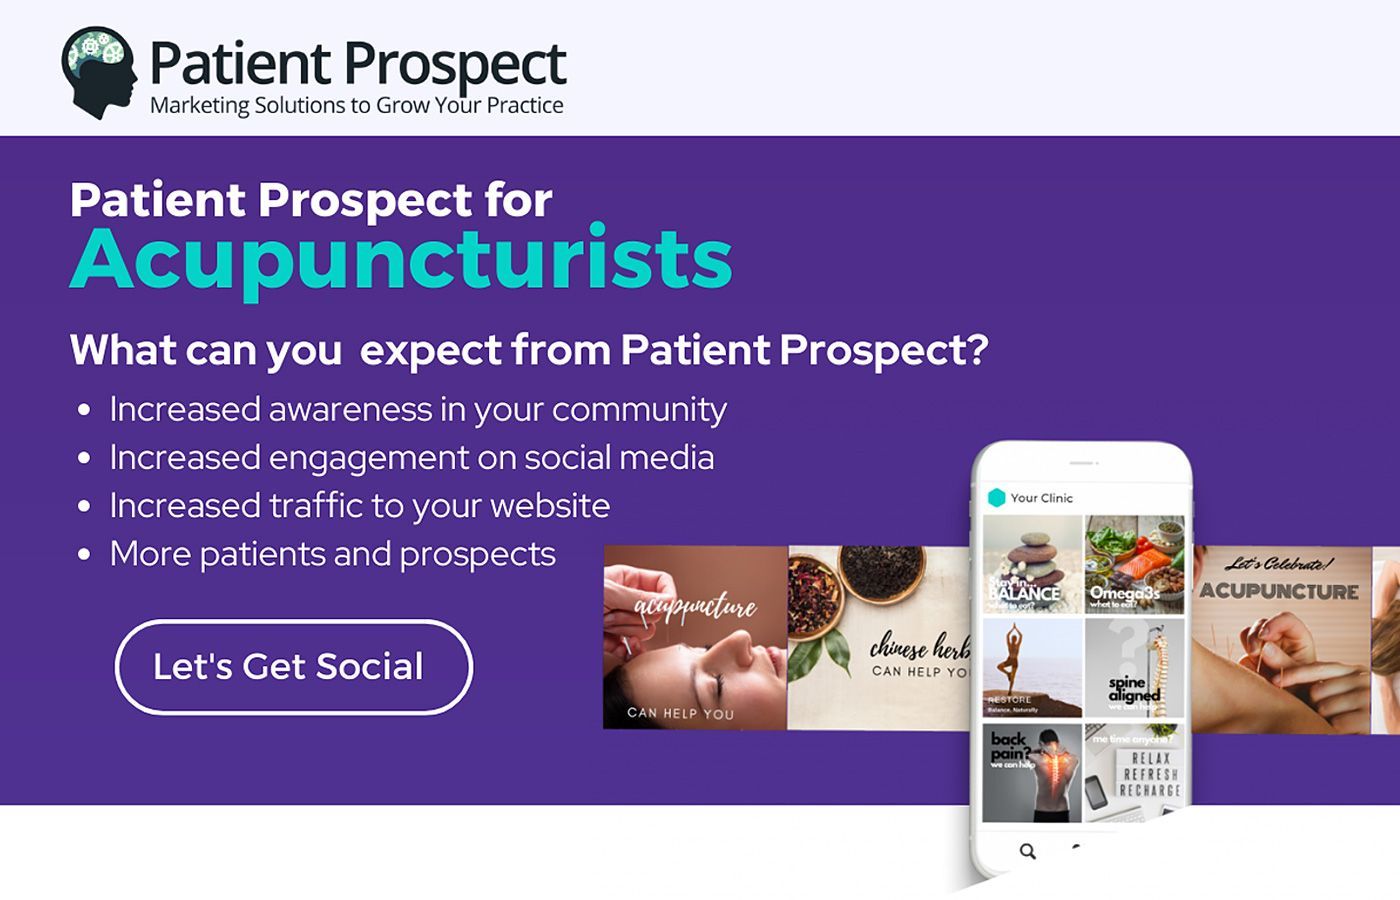 Patient Prospect for Acupuncturists - What can you expect from Patient Prospect?